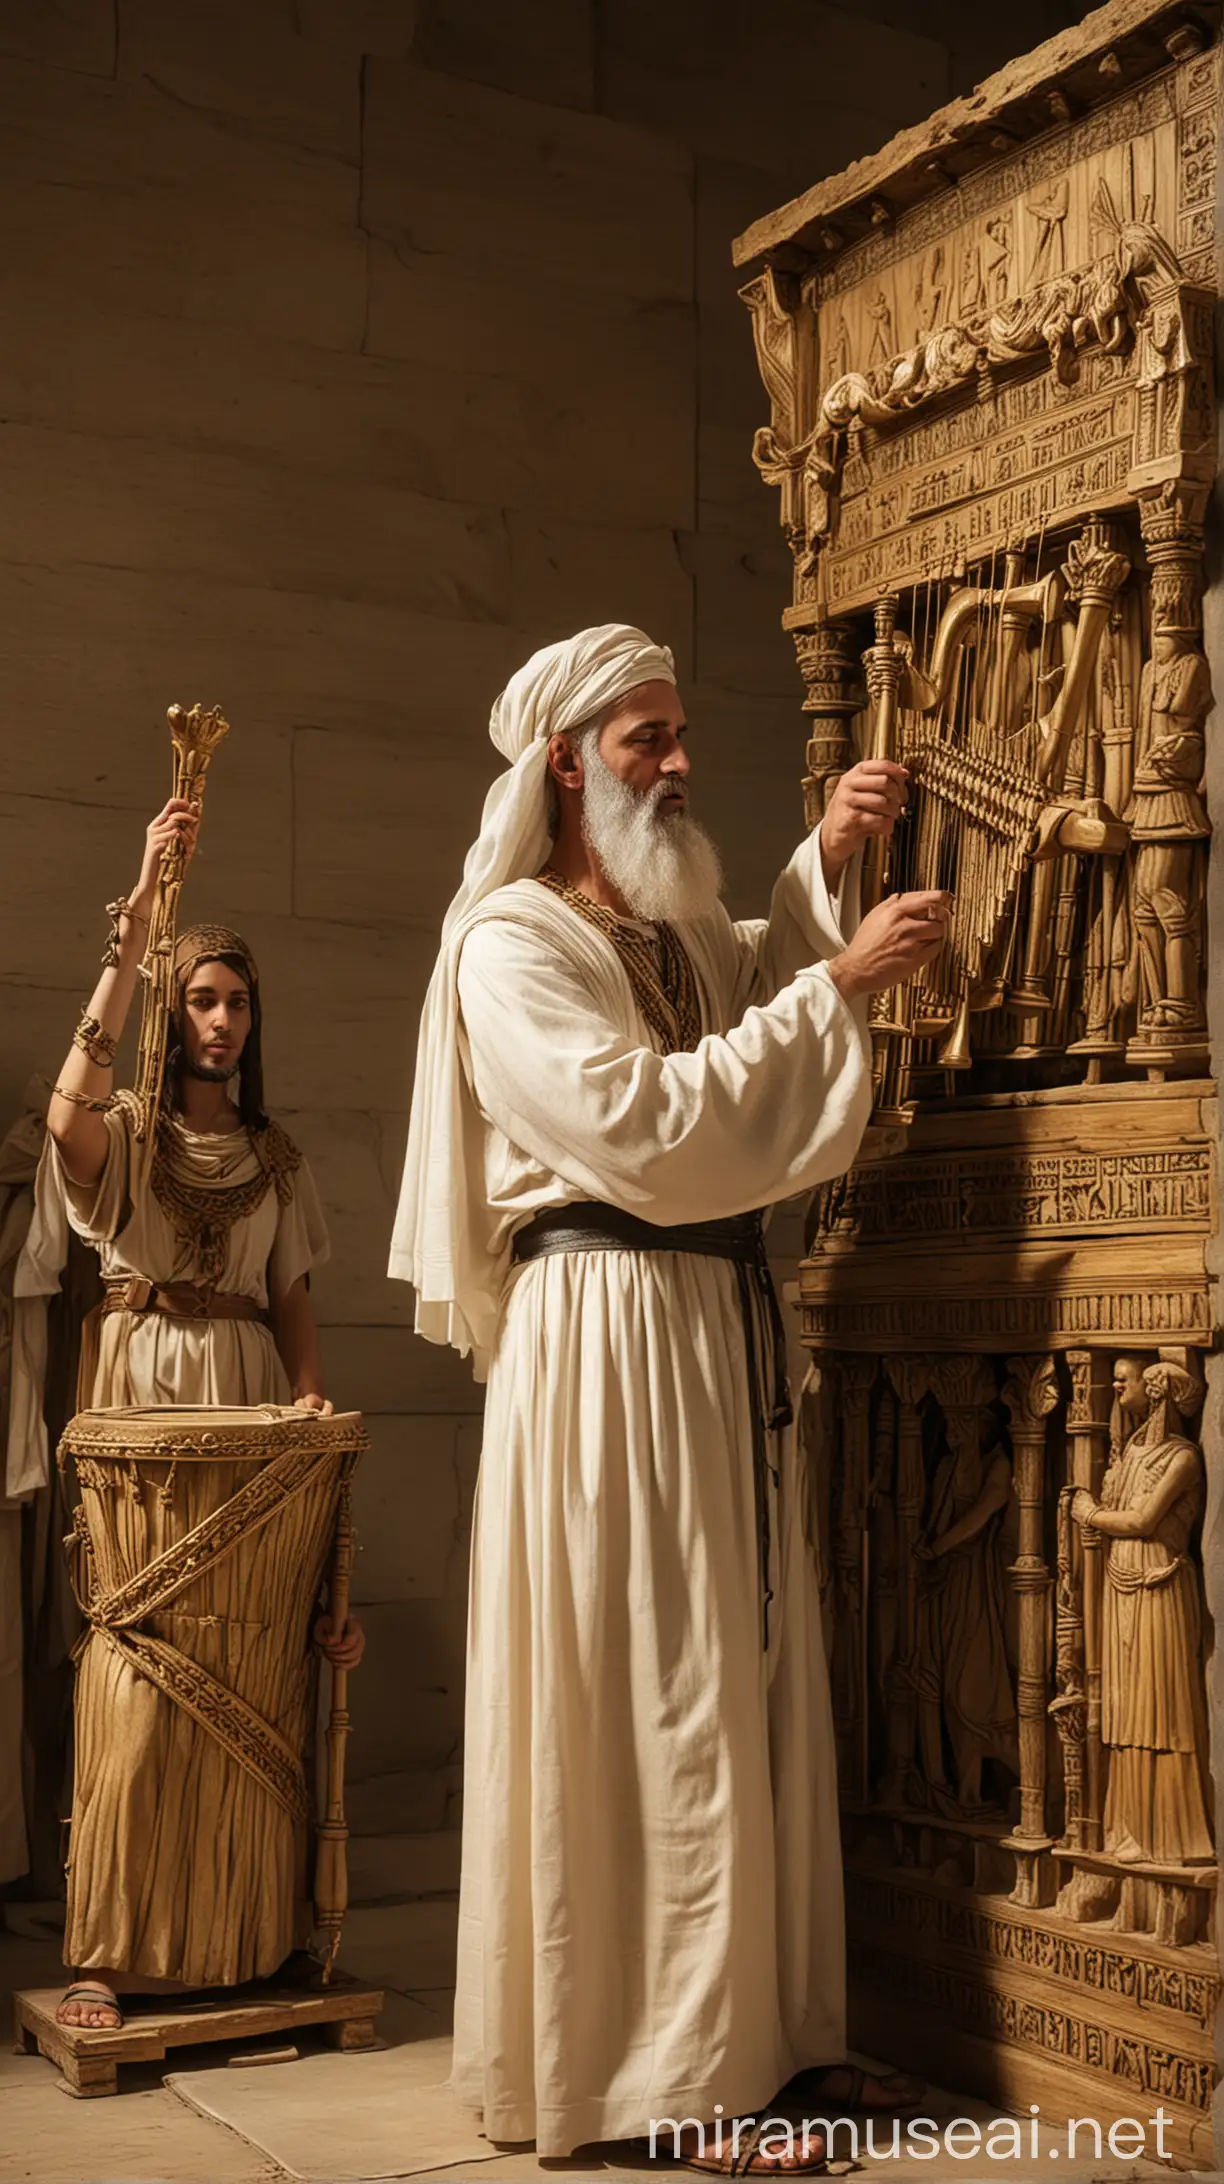 Generate an image depicting Elipheleh, a Levite of the second rank, playing musical instruments in front of the ark of the covenant in the ancient world 